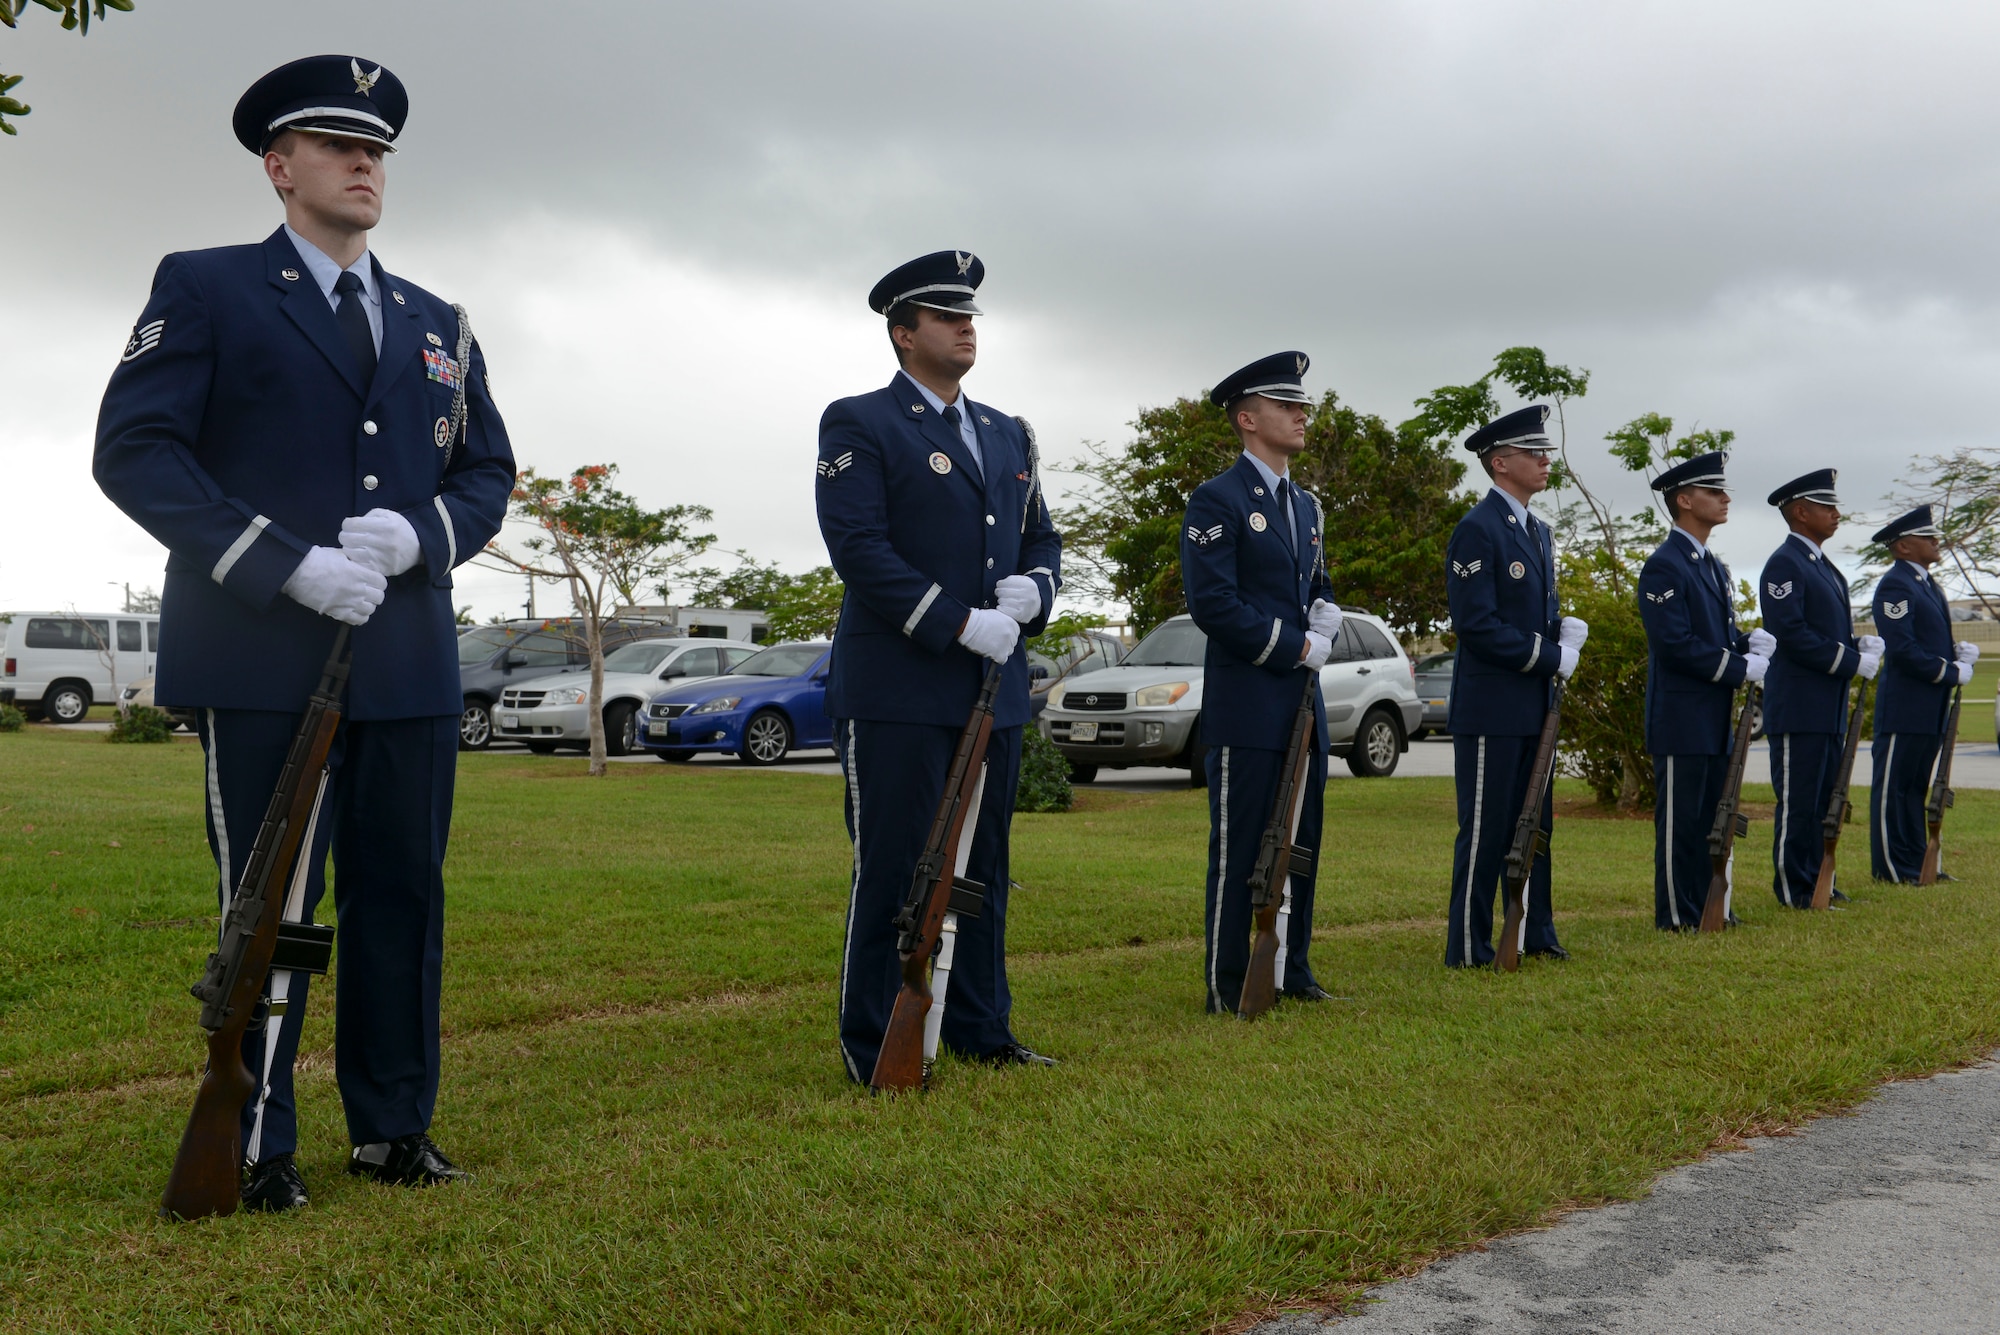 The base honor guard team stands at parade rest prior to performing the twenty-one-gun salute during the Linebacker II ceremony Dec. 13, 2013, on Andersen Air Force Base, Guam. In December 1972, bombers stationed at Andersen flew 729 sorties in 11 days for Operation Linebacker II. (U.S. Air Force photo by Airman 1st Class Emily A. Bradley/Released)